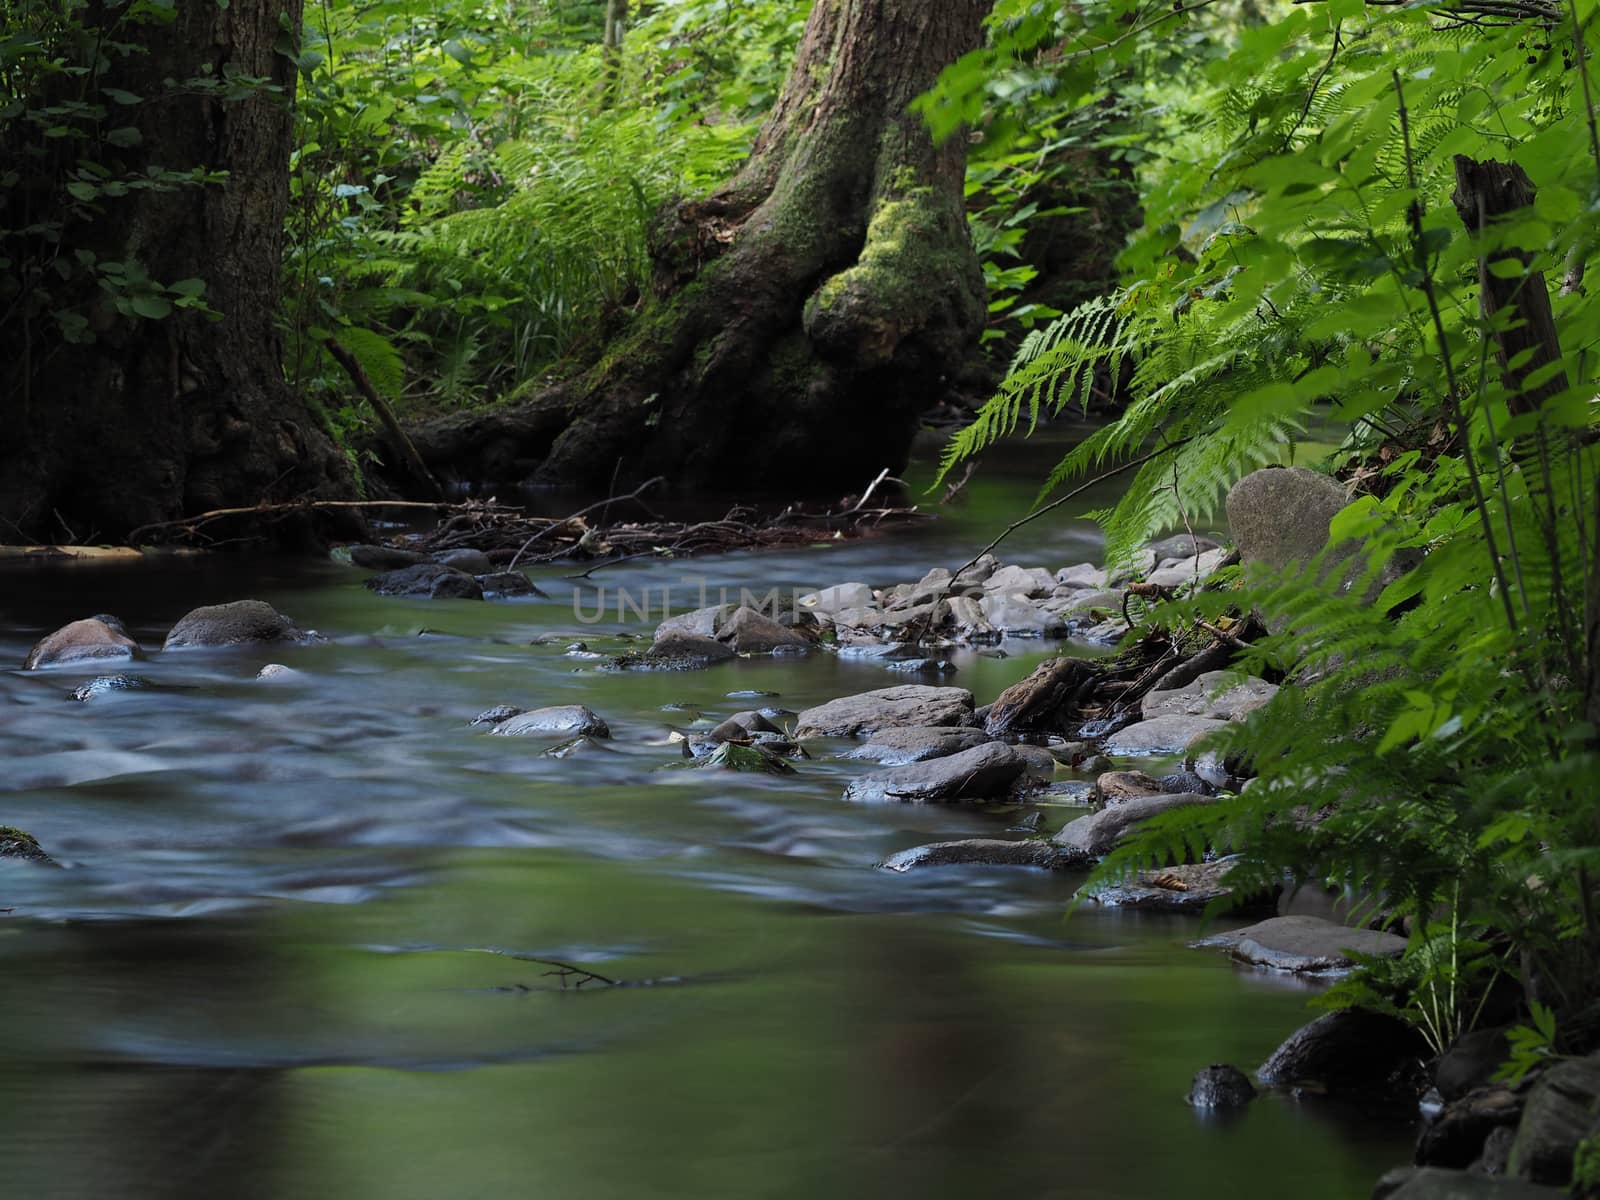 Long exposure magic forest stream with stones, trees and fern